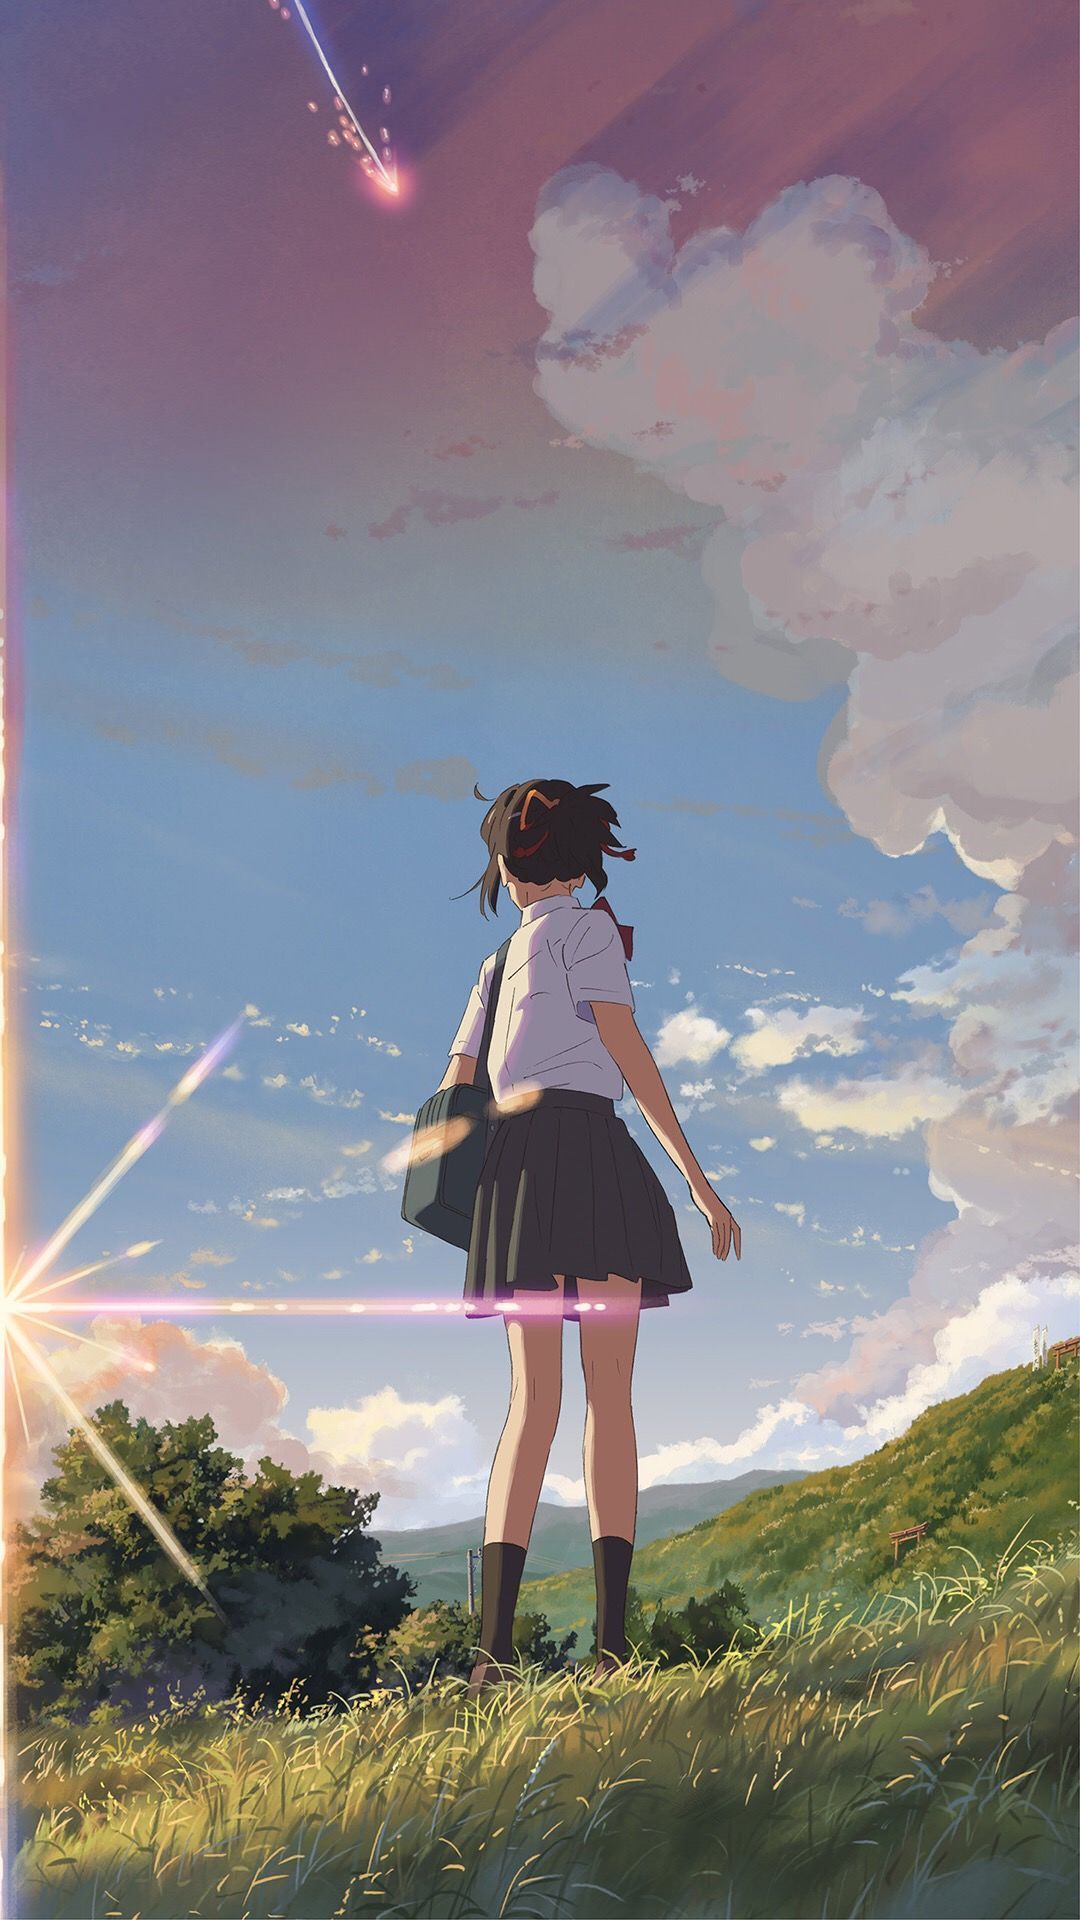 Your Name iPhone Wallpaper Free .wallpaperaccess.com